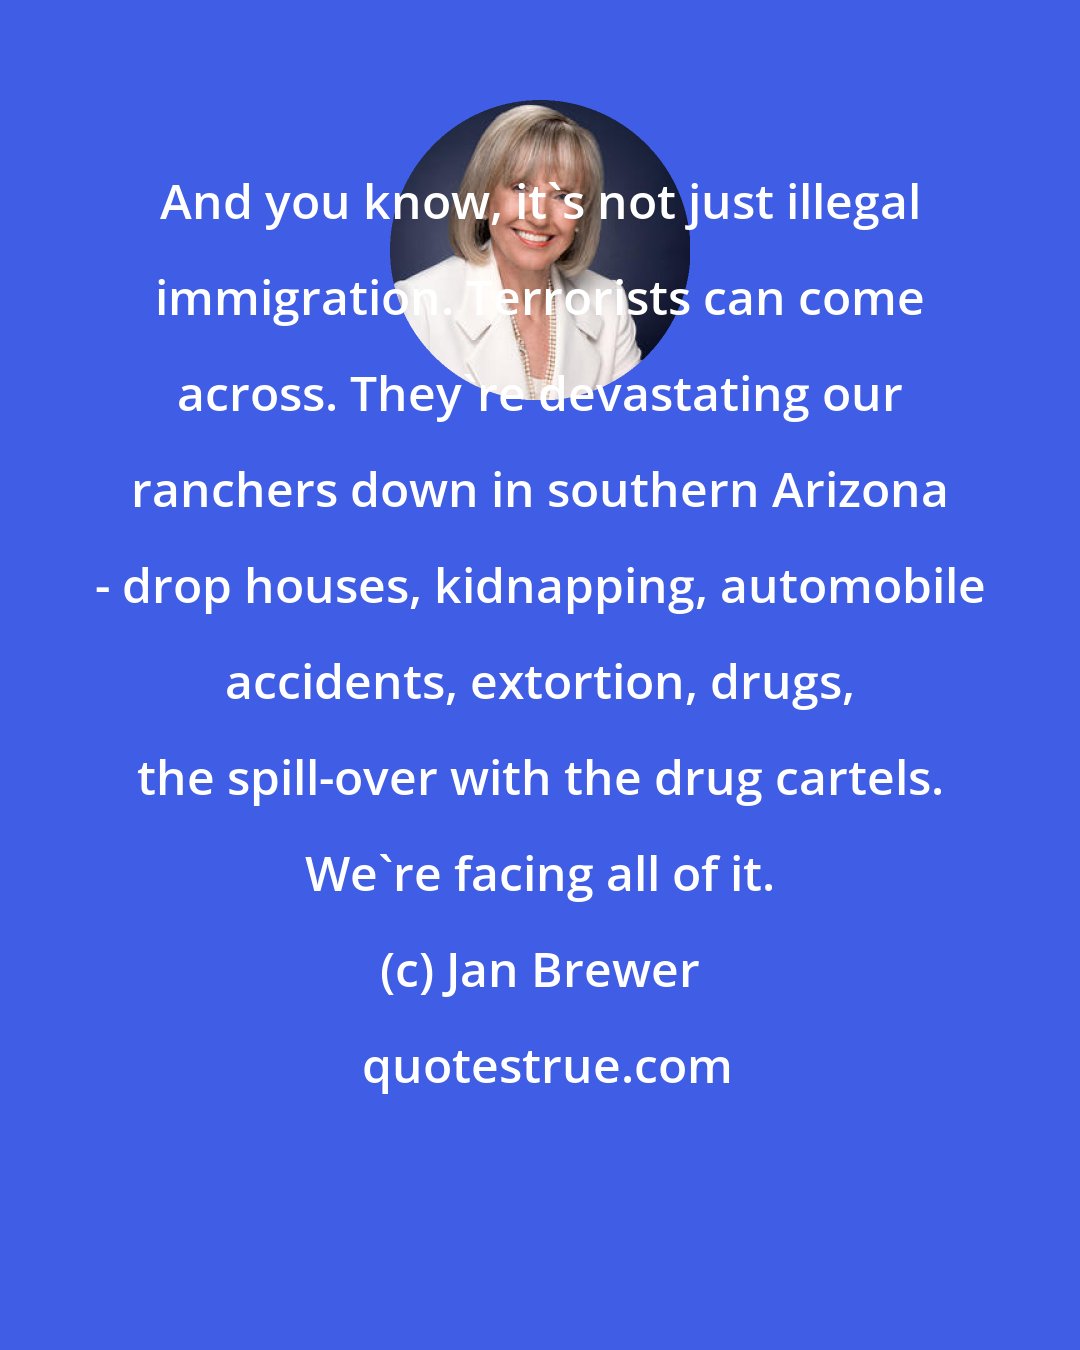 Jan Brewer: And you know, it's not just illegal immigration. Terrorists can come across. They're devastating our ranchers down in southern Arizona - drop houses, kidnapping, automobile accidents, extortion, drugs, the spill-over with the drug cartels. We're facing all of it.